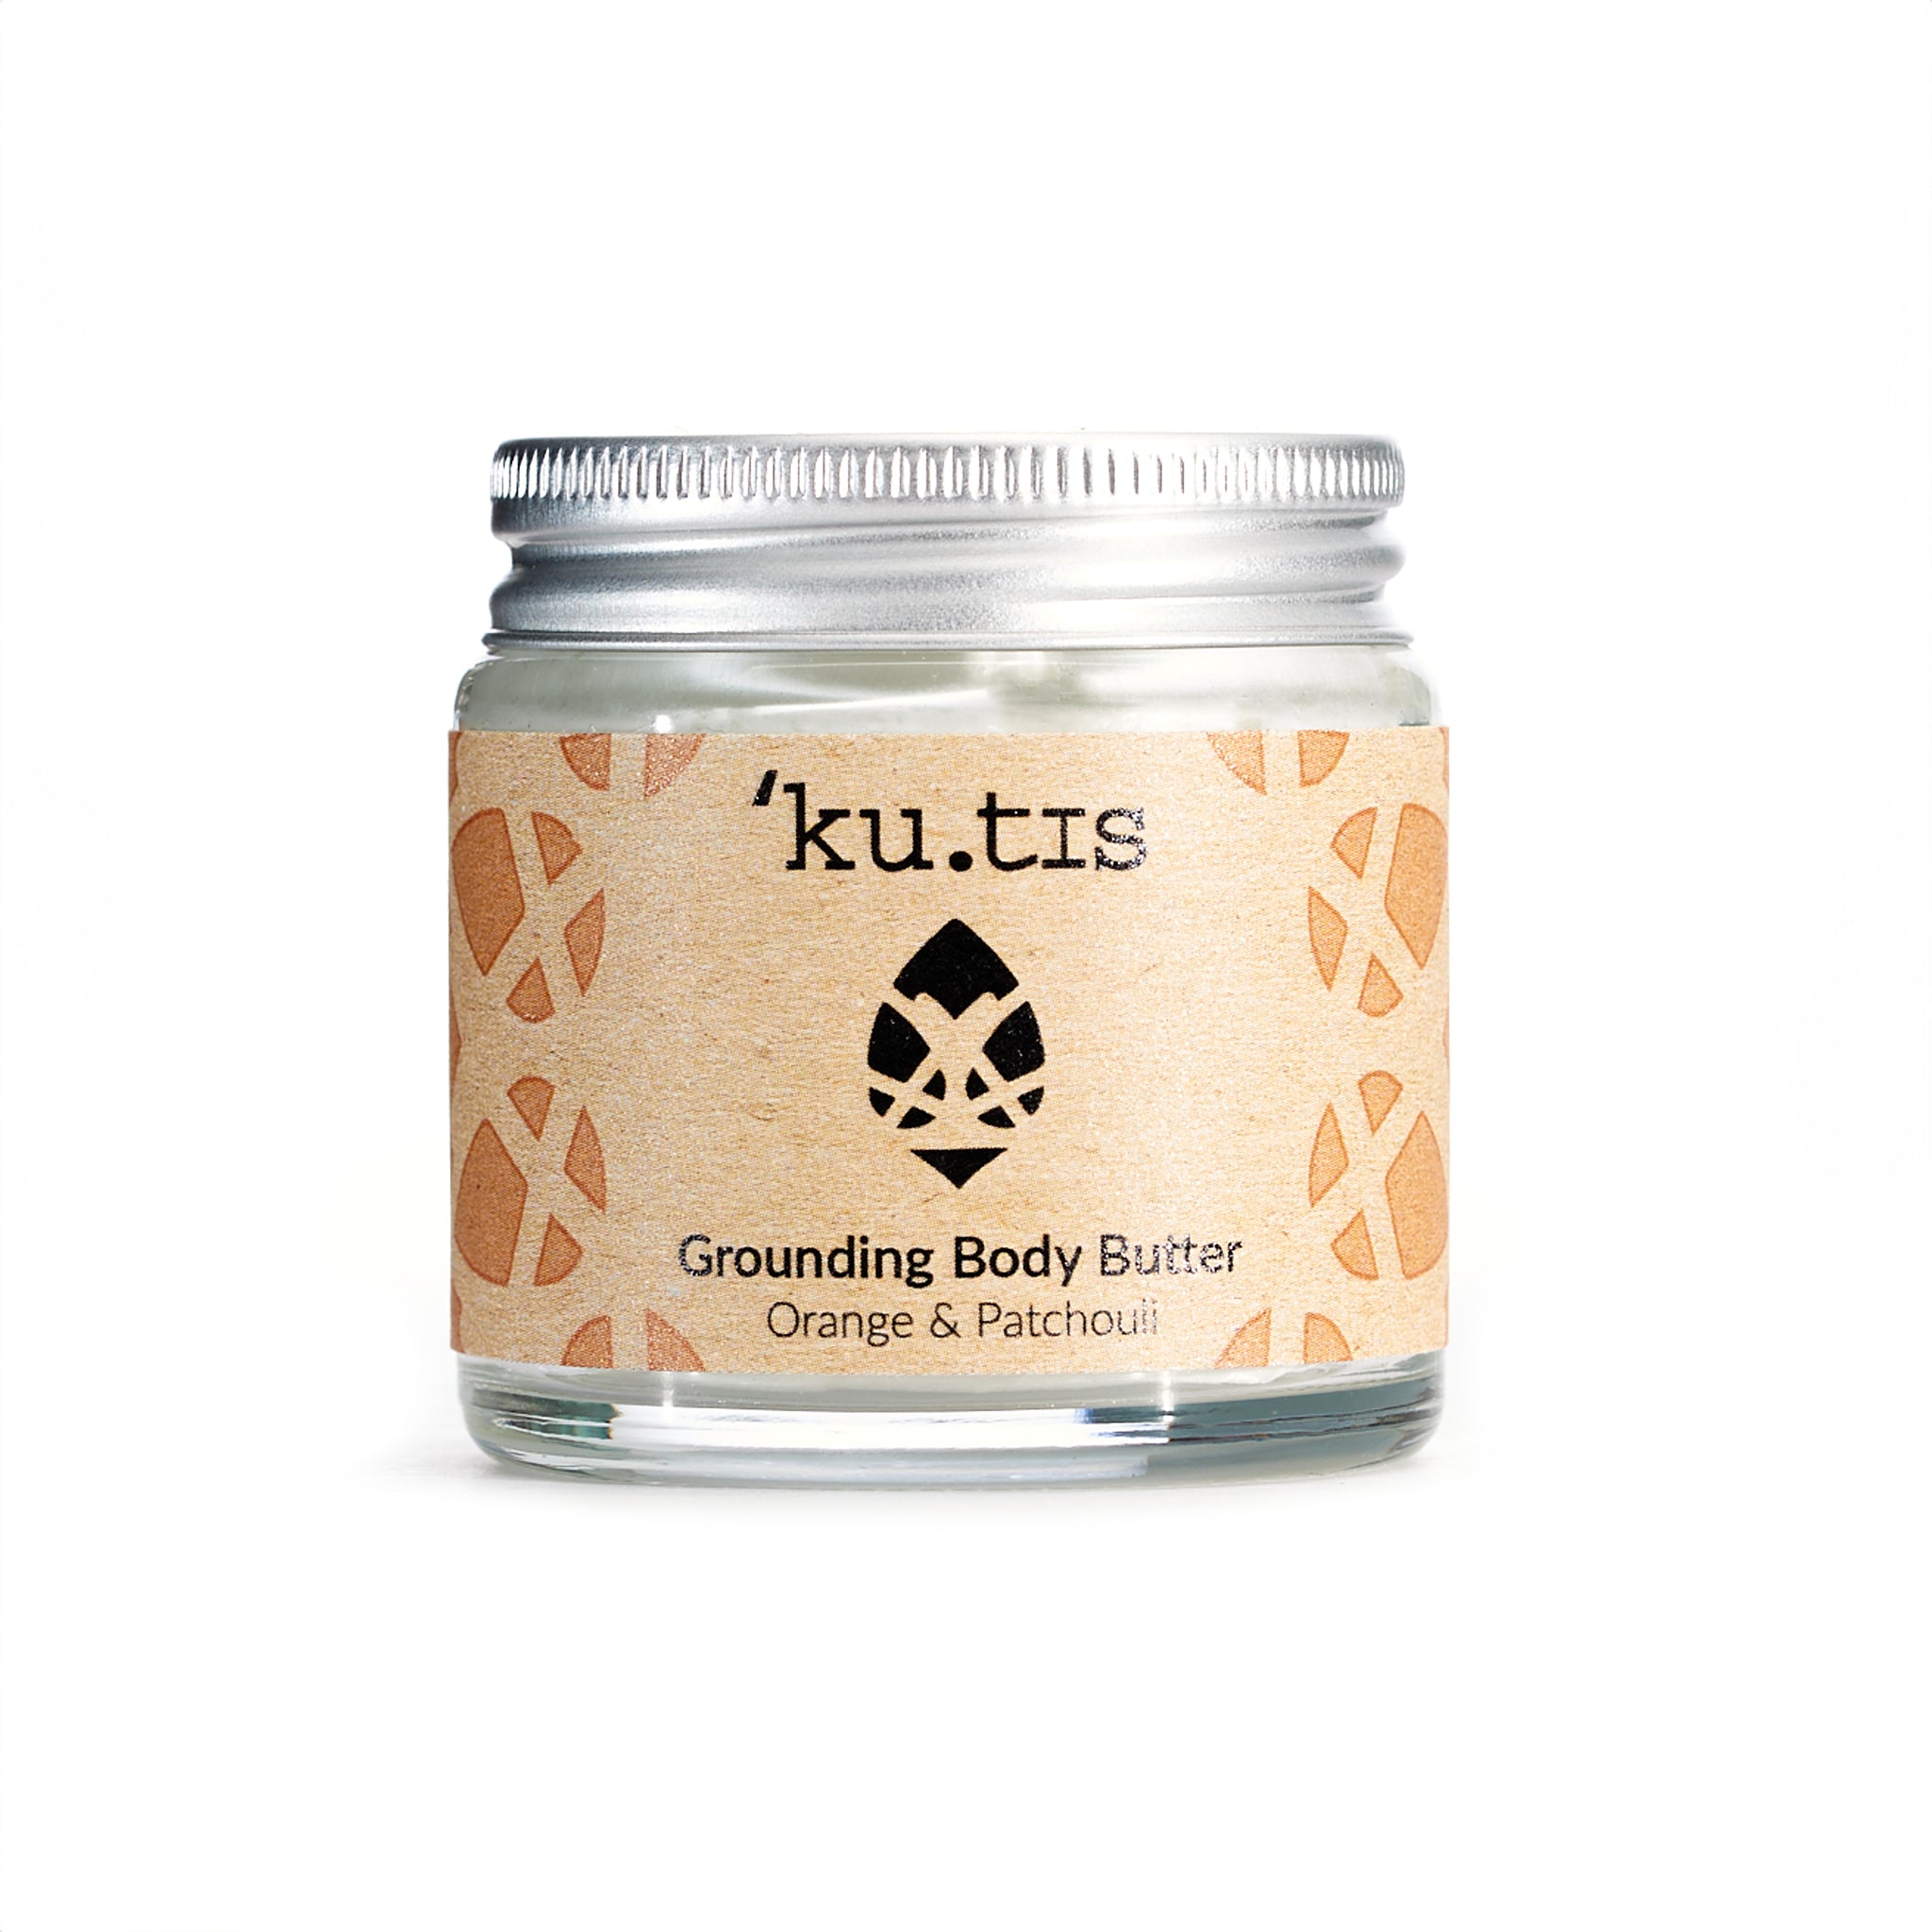 Natural orange and patchouli body butter moisturiser in a glass jar with an aluminium screw top silver lid.